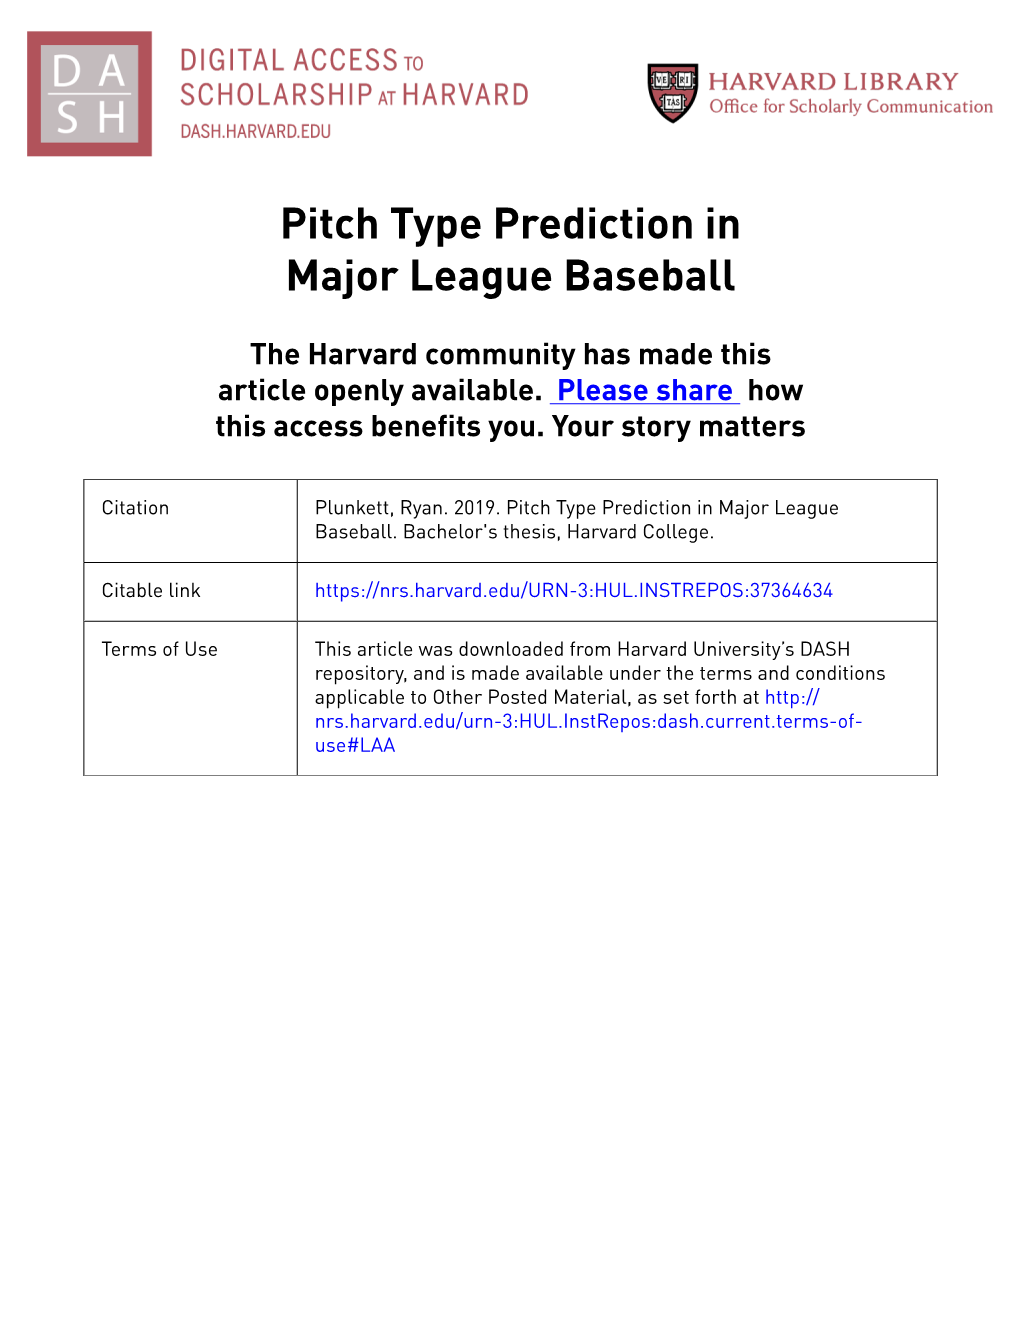 Pitch Type Prediction in Major League Baseball